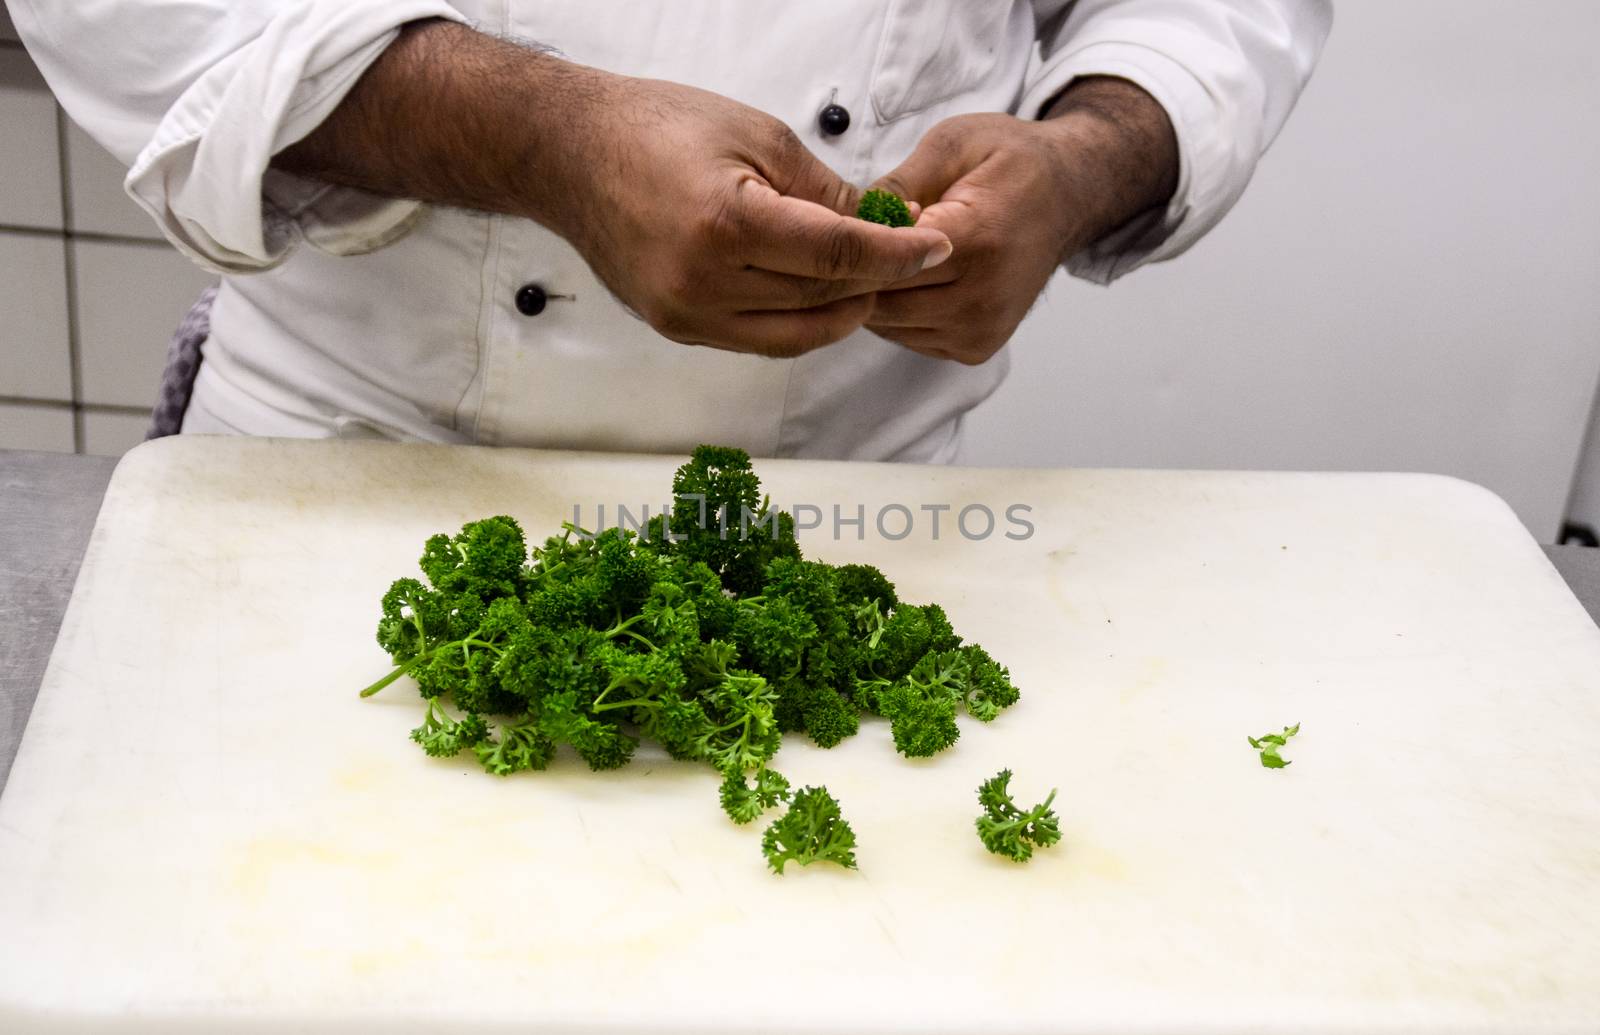 A chef preparing food in the restaurant kitchen amidst the threat of the covid-19 pandemic